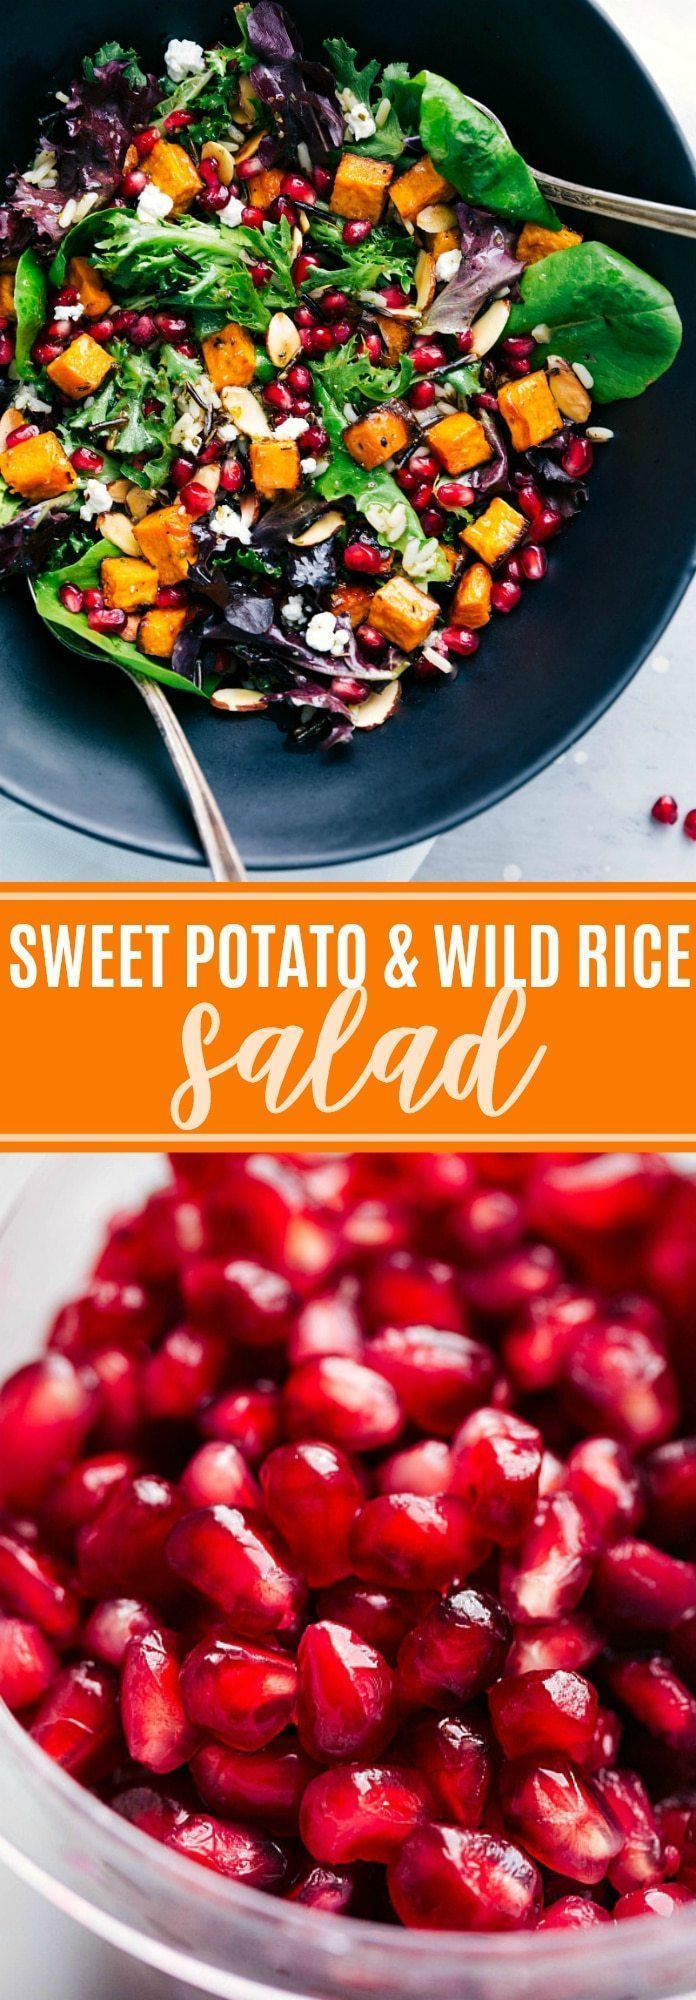 The BEST roasted sweet potato and wild rice salad | chelseasmessyapron.com | #sweetpotato #wildrice #salad #thanksgiving #fall #health #healthy #lemon #dressing #best #popular #easy #quick #pomegranate #almond #cheese #kidfriendly